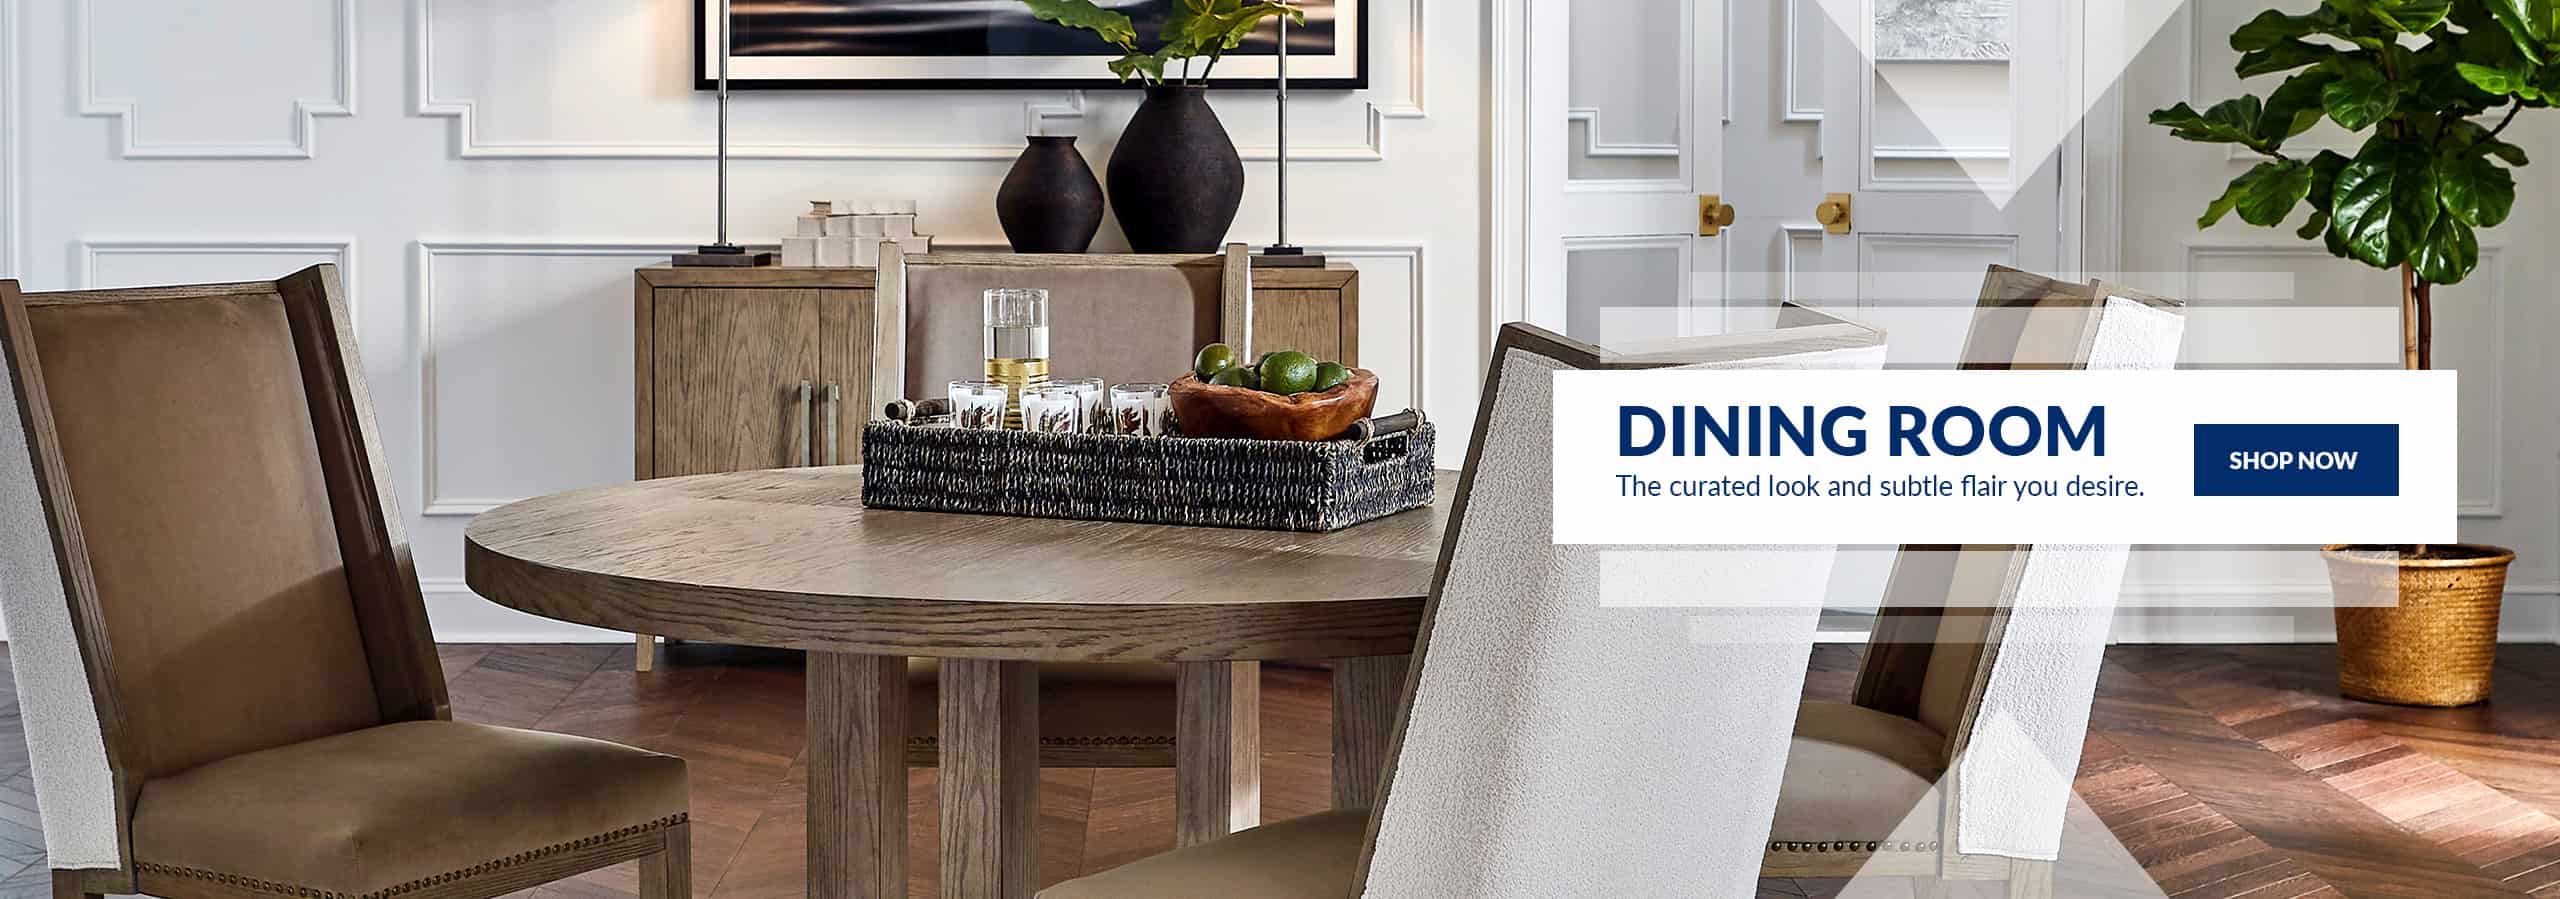 Dining Room – Shop Now